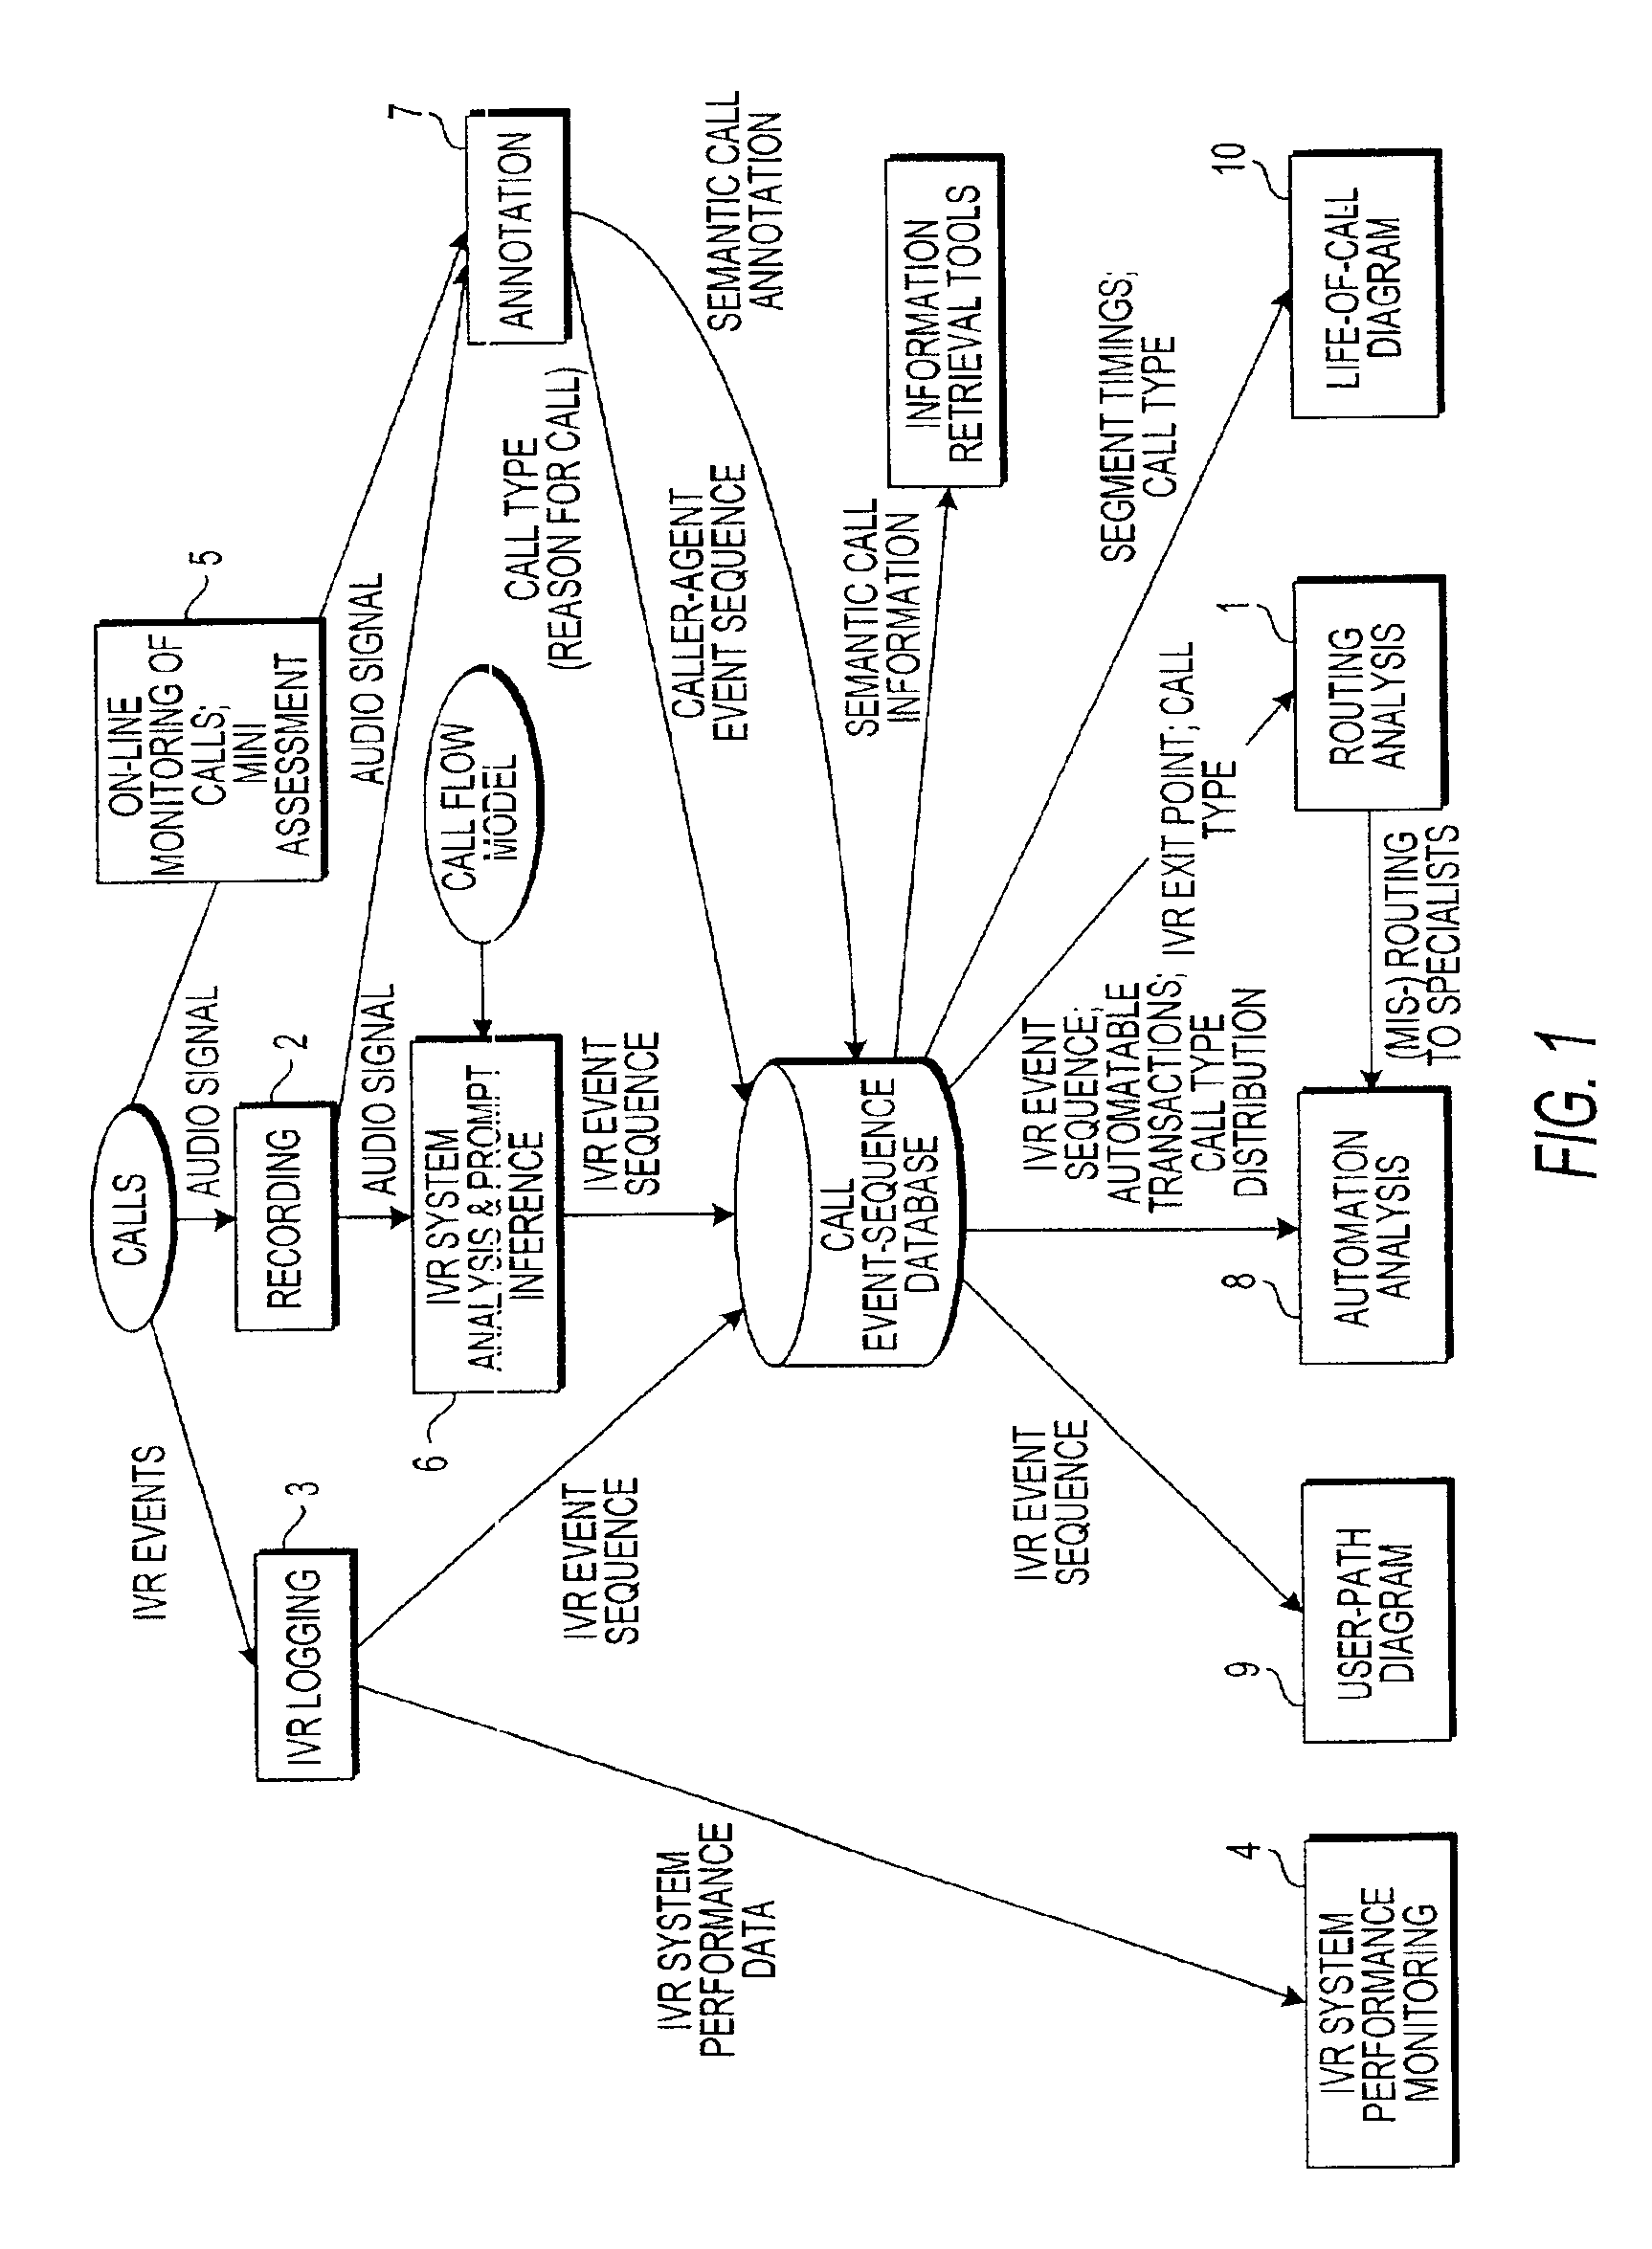 Apparatus and method for quantifying an automation benefit of an automated response system